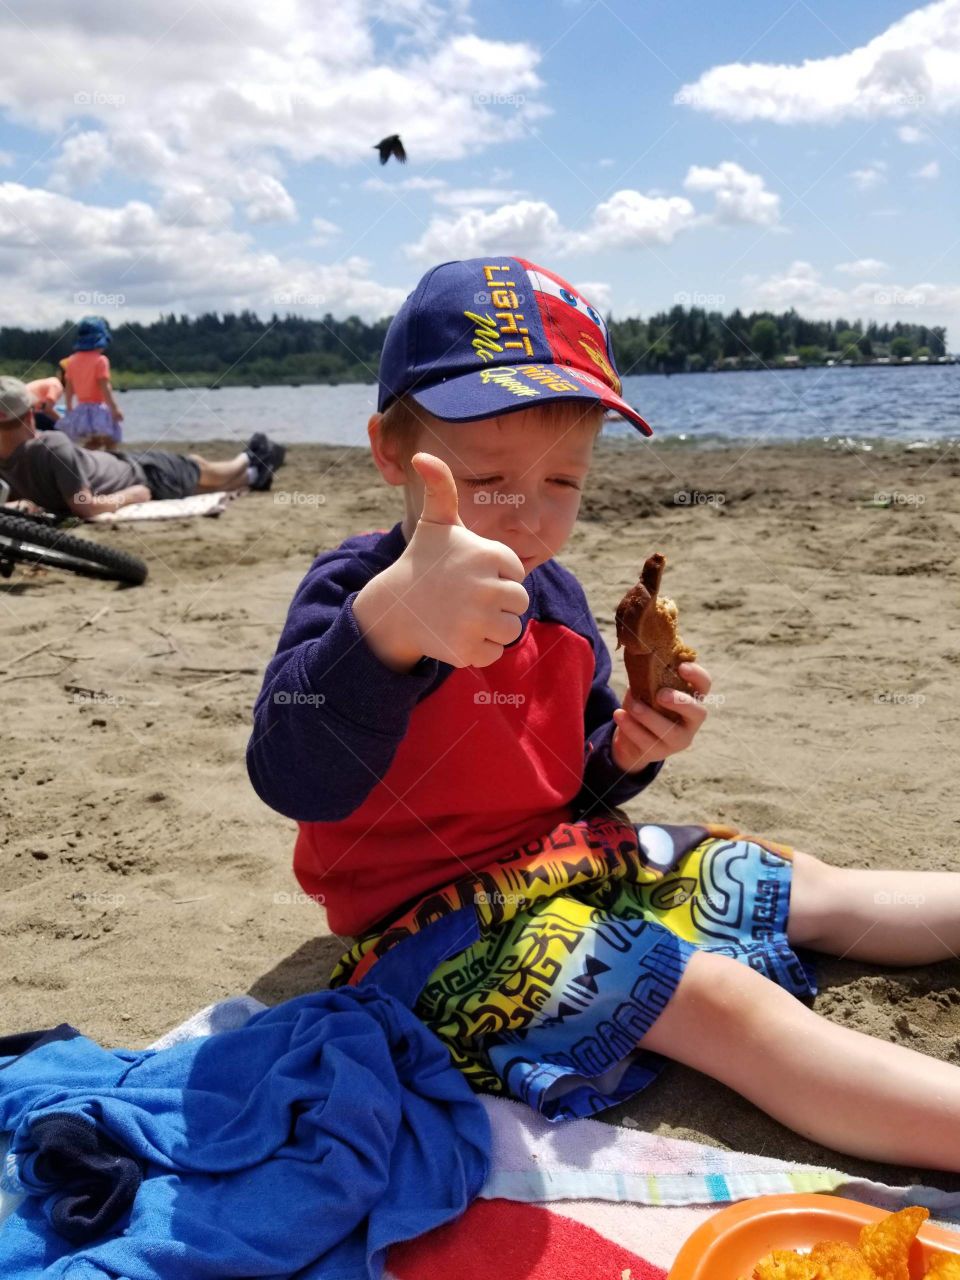 Thumbs up for the beach